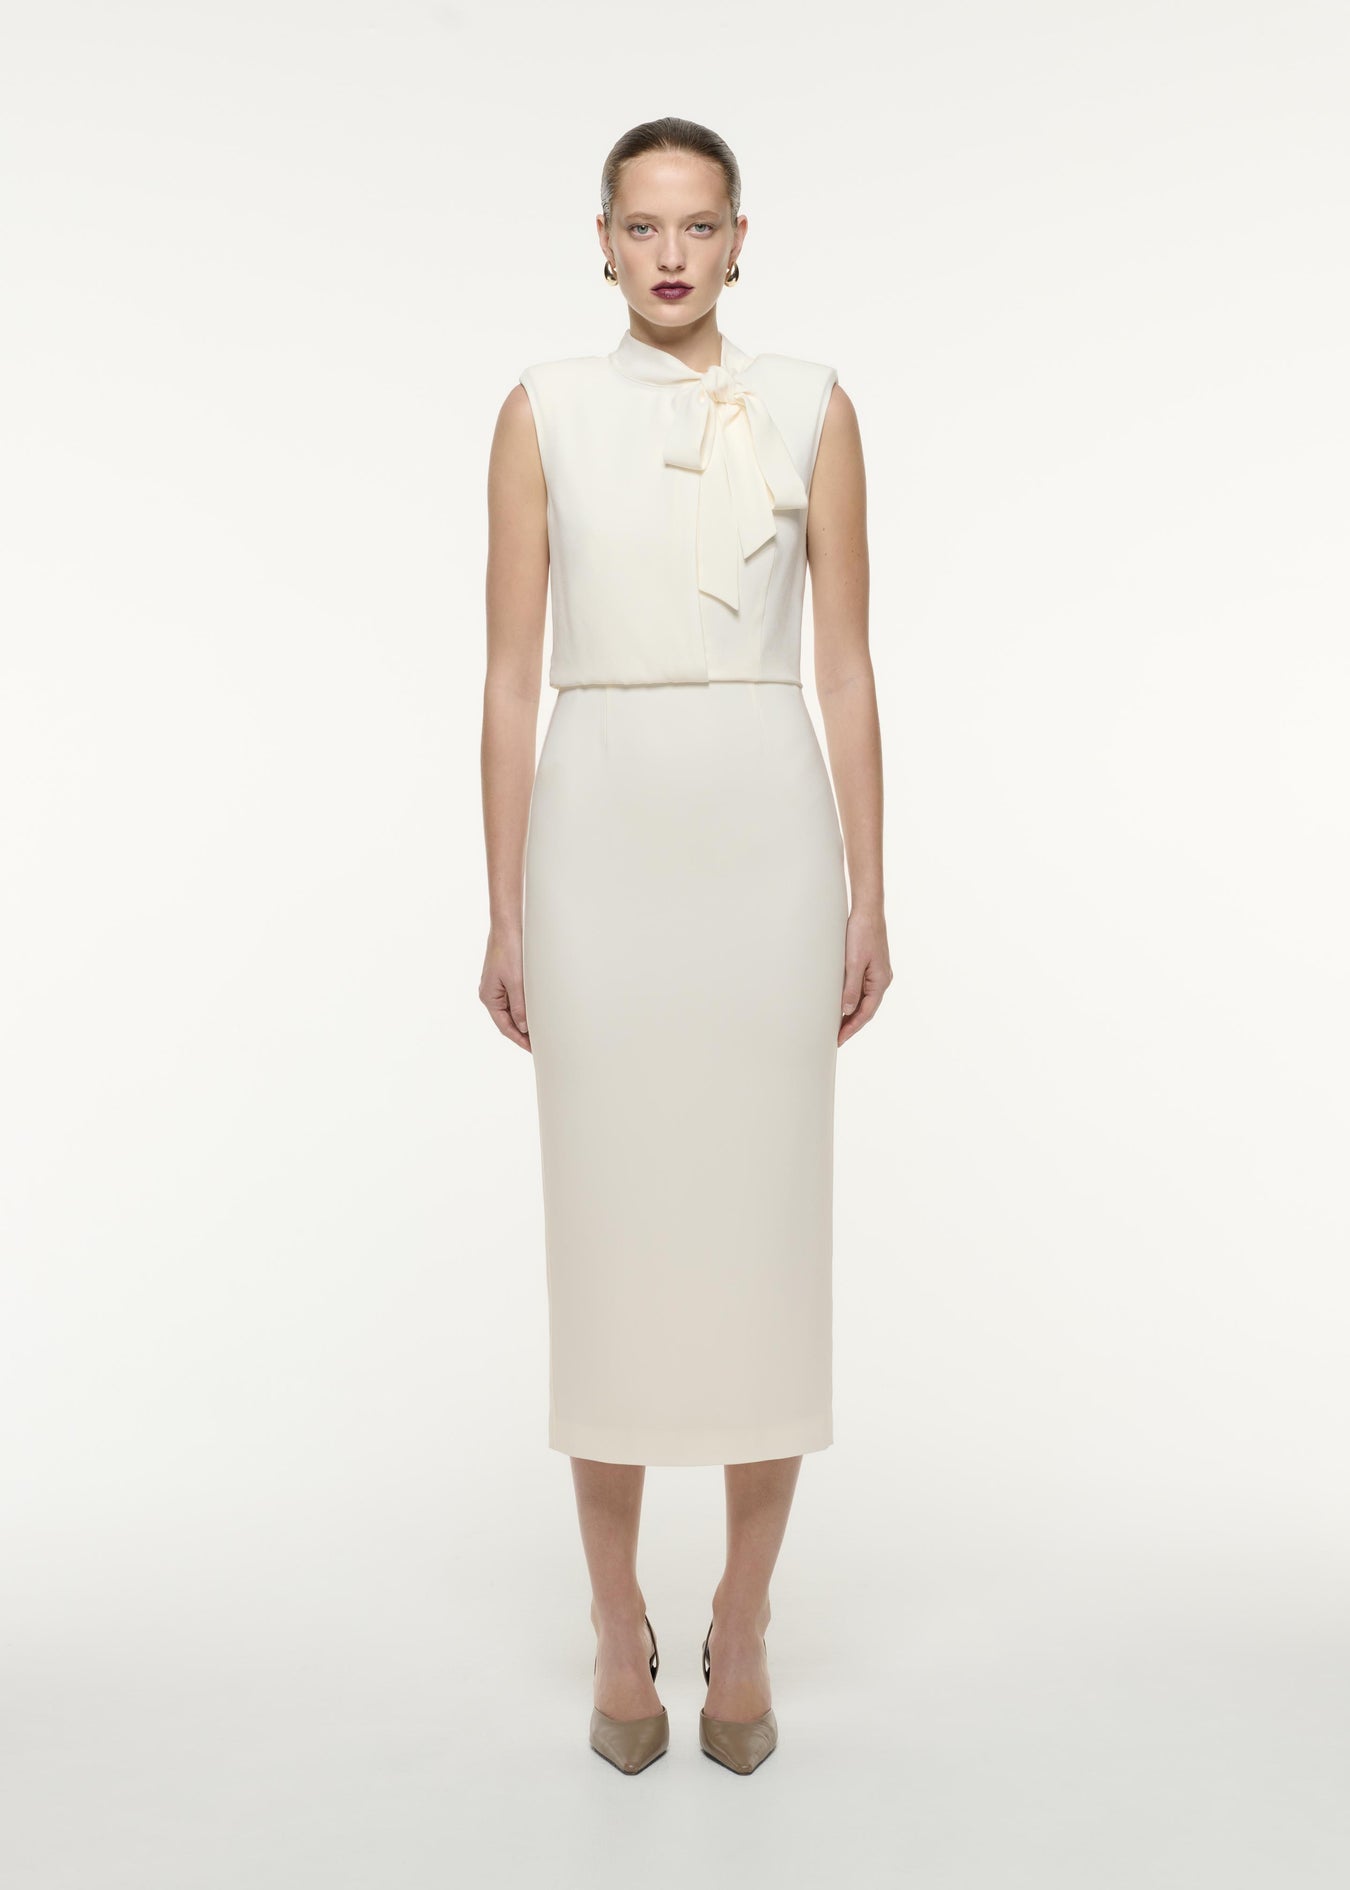 A front view image of a model wearing the Satin Crepe Midi Dress in Cream